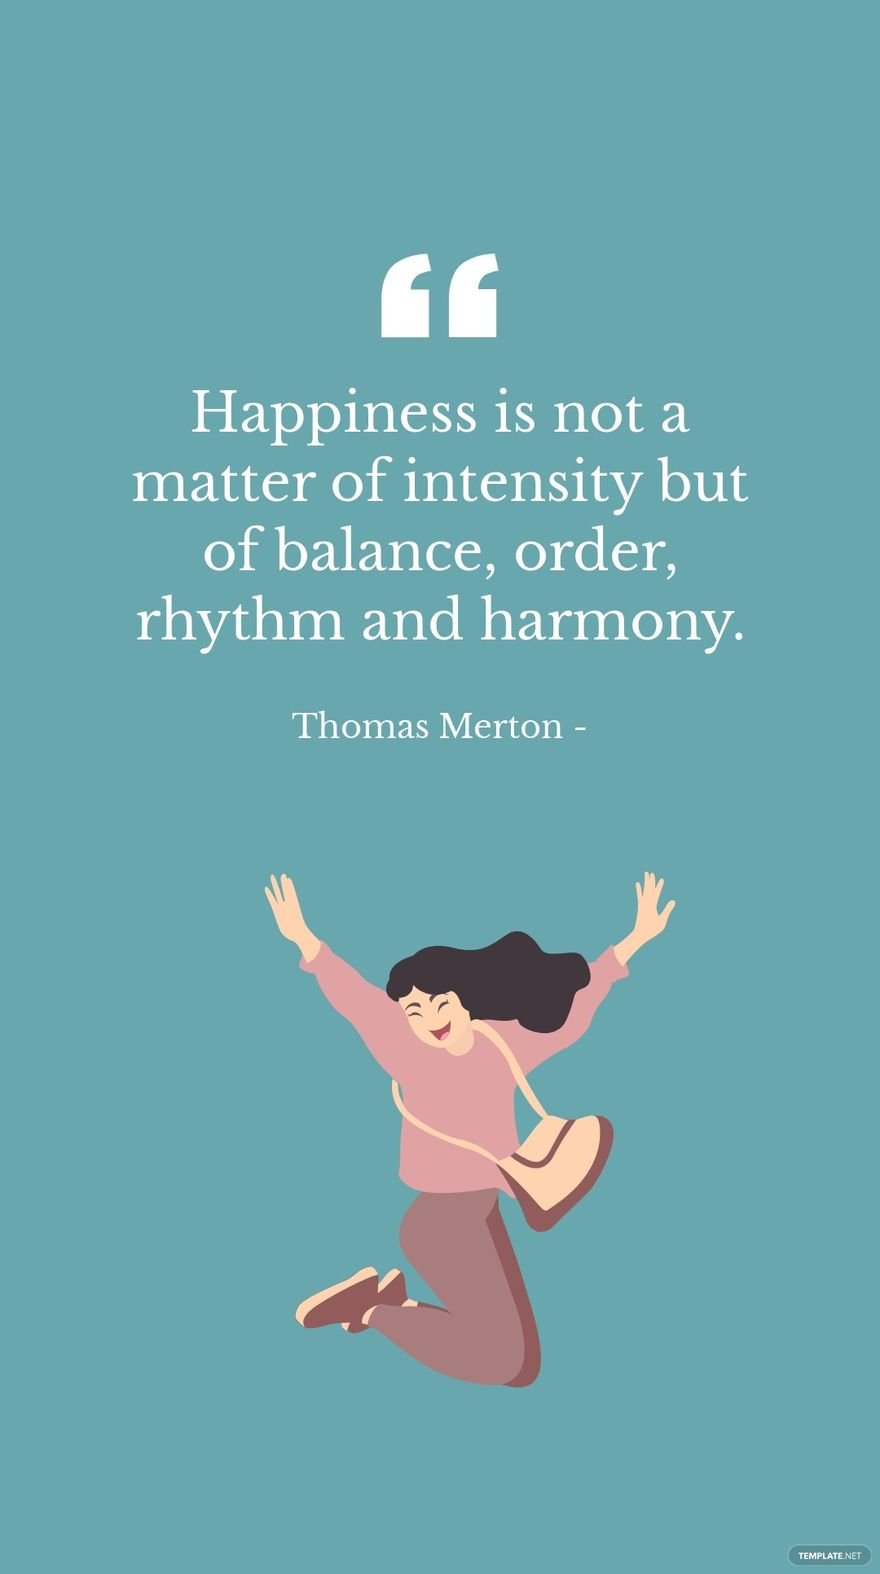 Thomas Merton - Happiness is not a matter of intensity but of balance, order, rhythm and harmony.